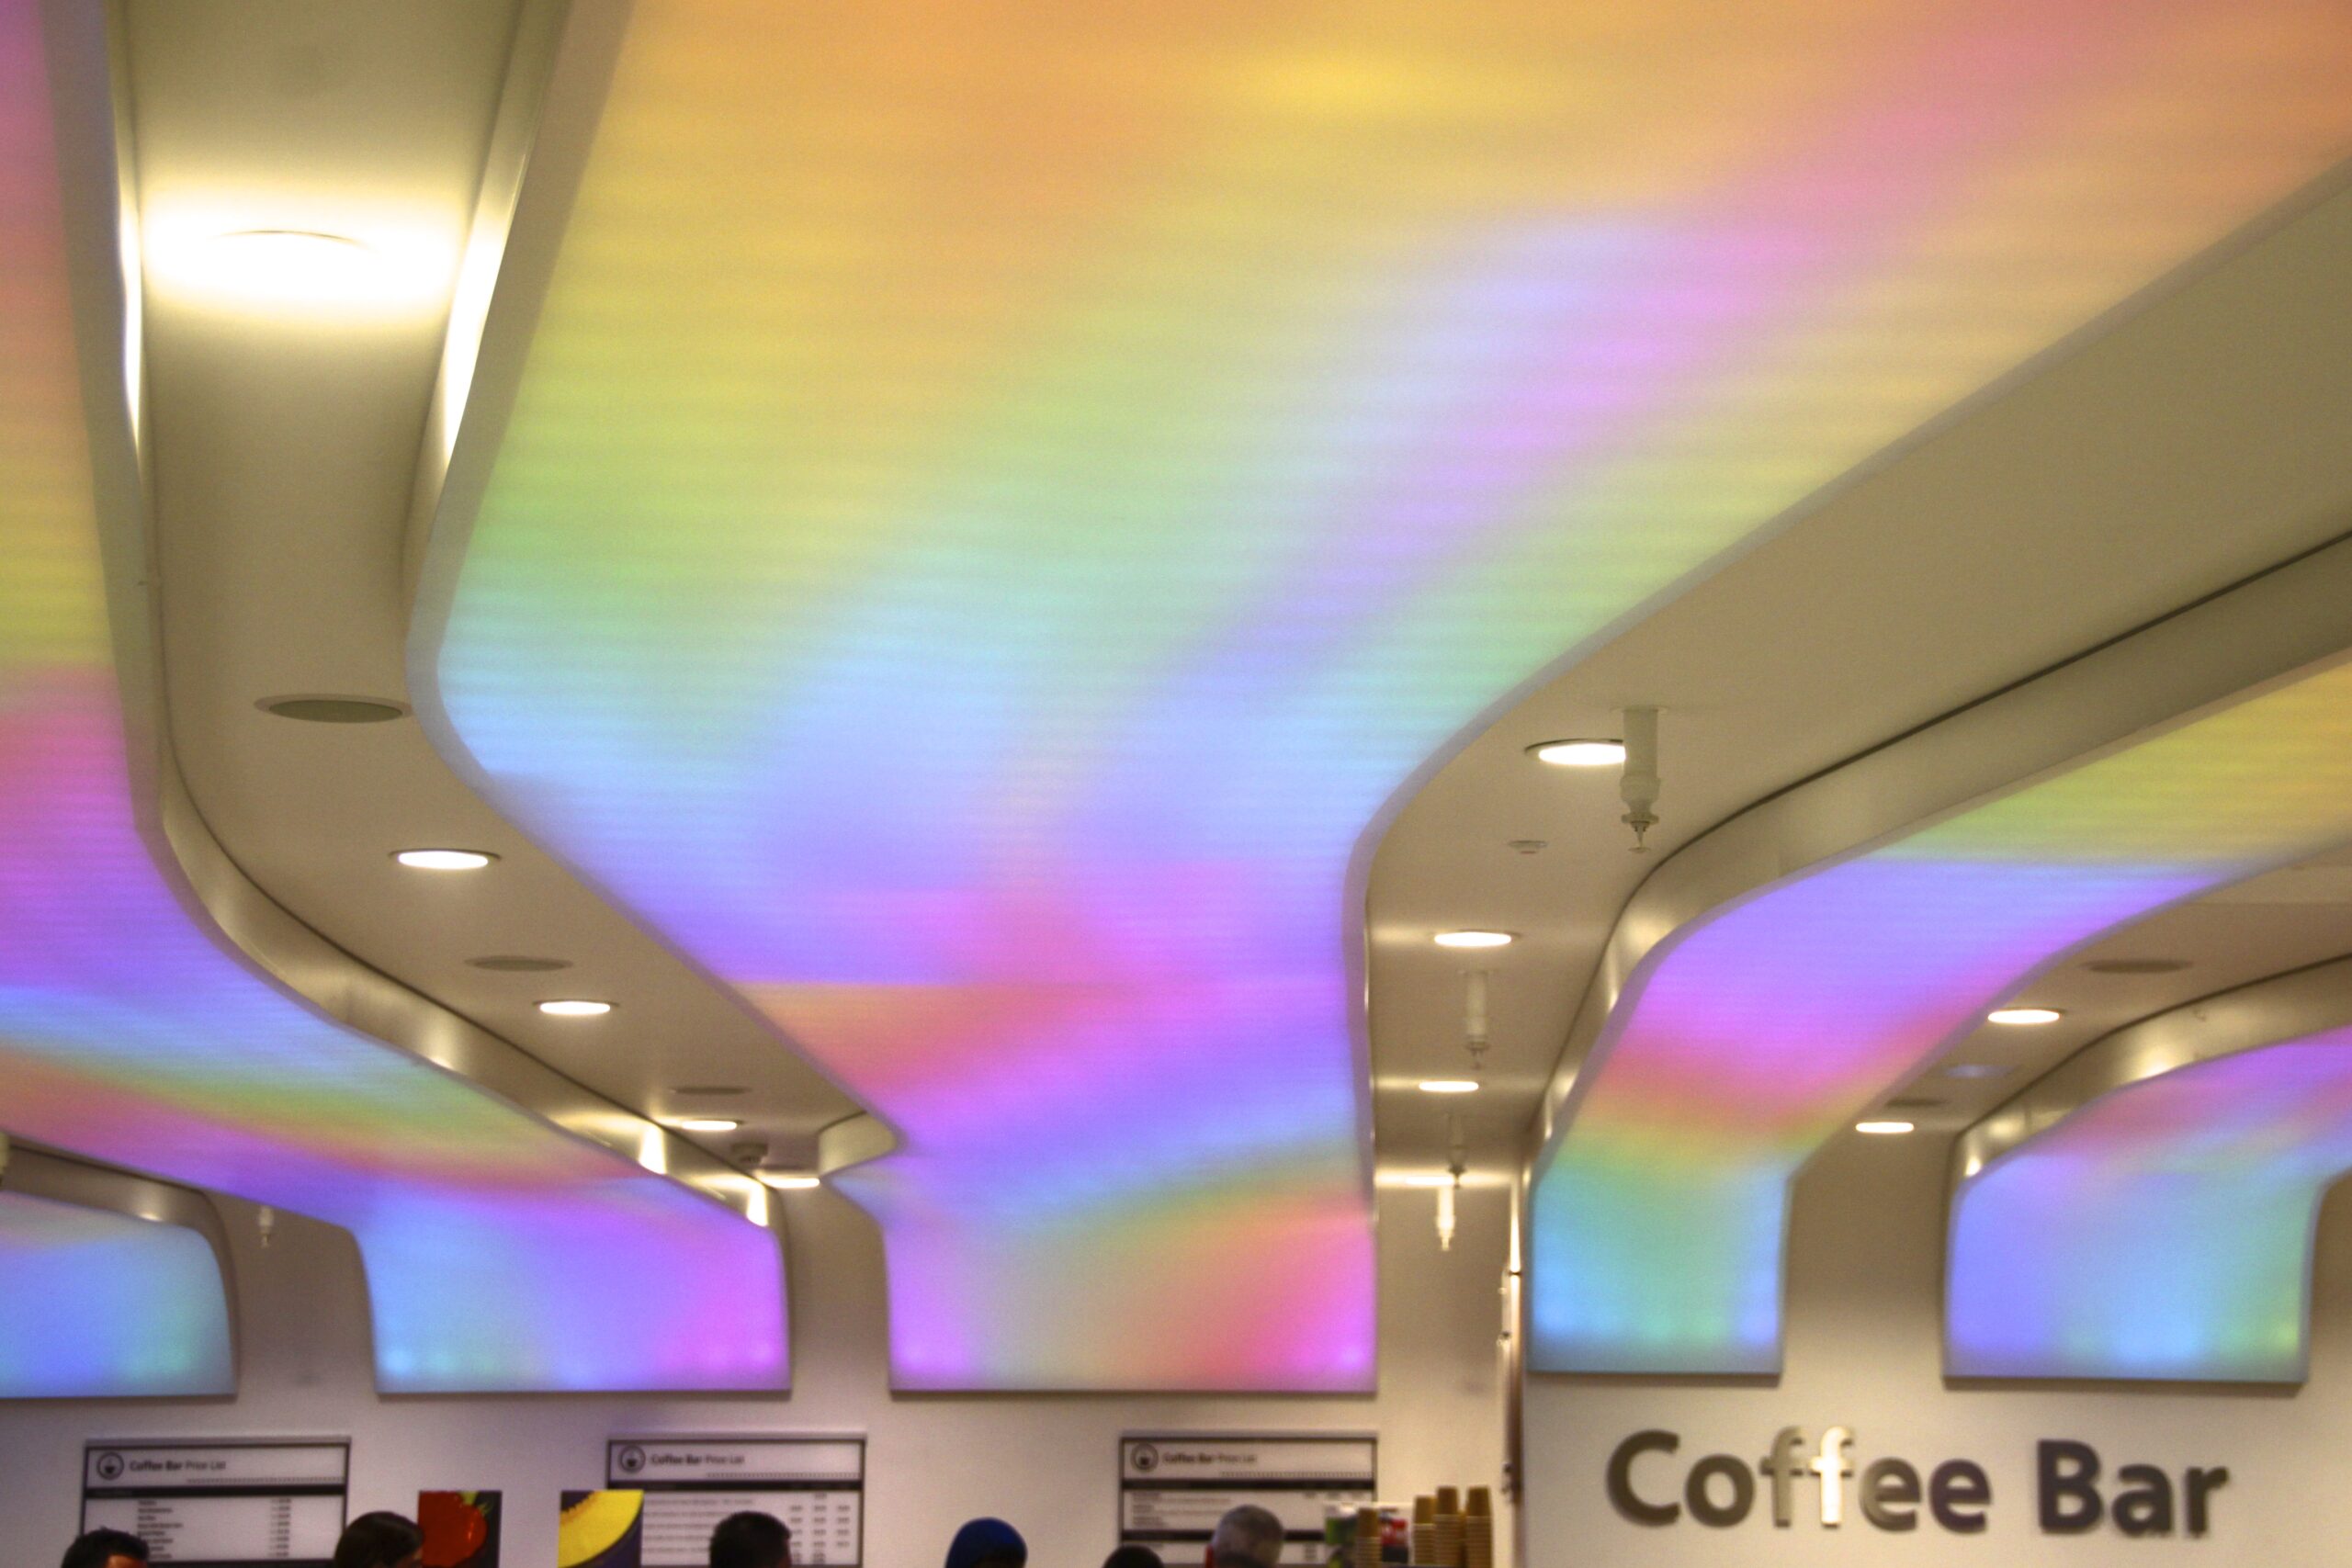 GOSH - Energy-Efficient Interior and Exterior Lighting for Healthcare